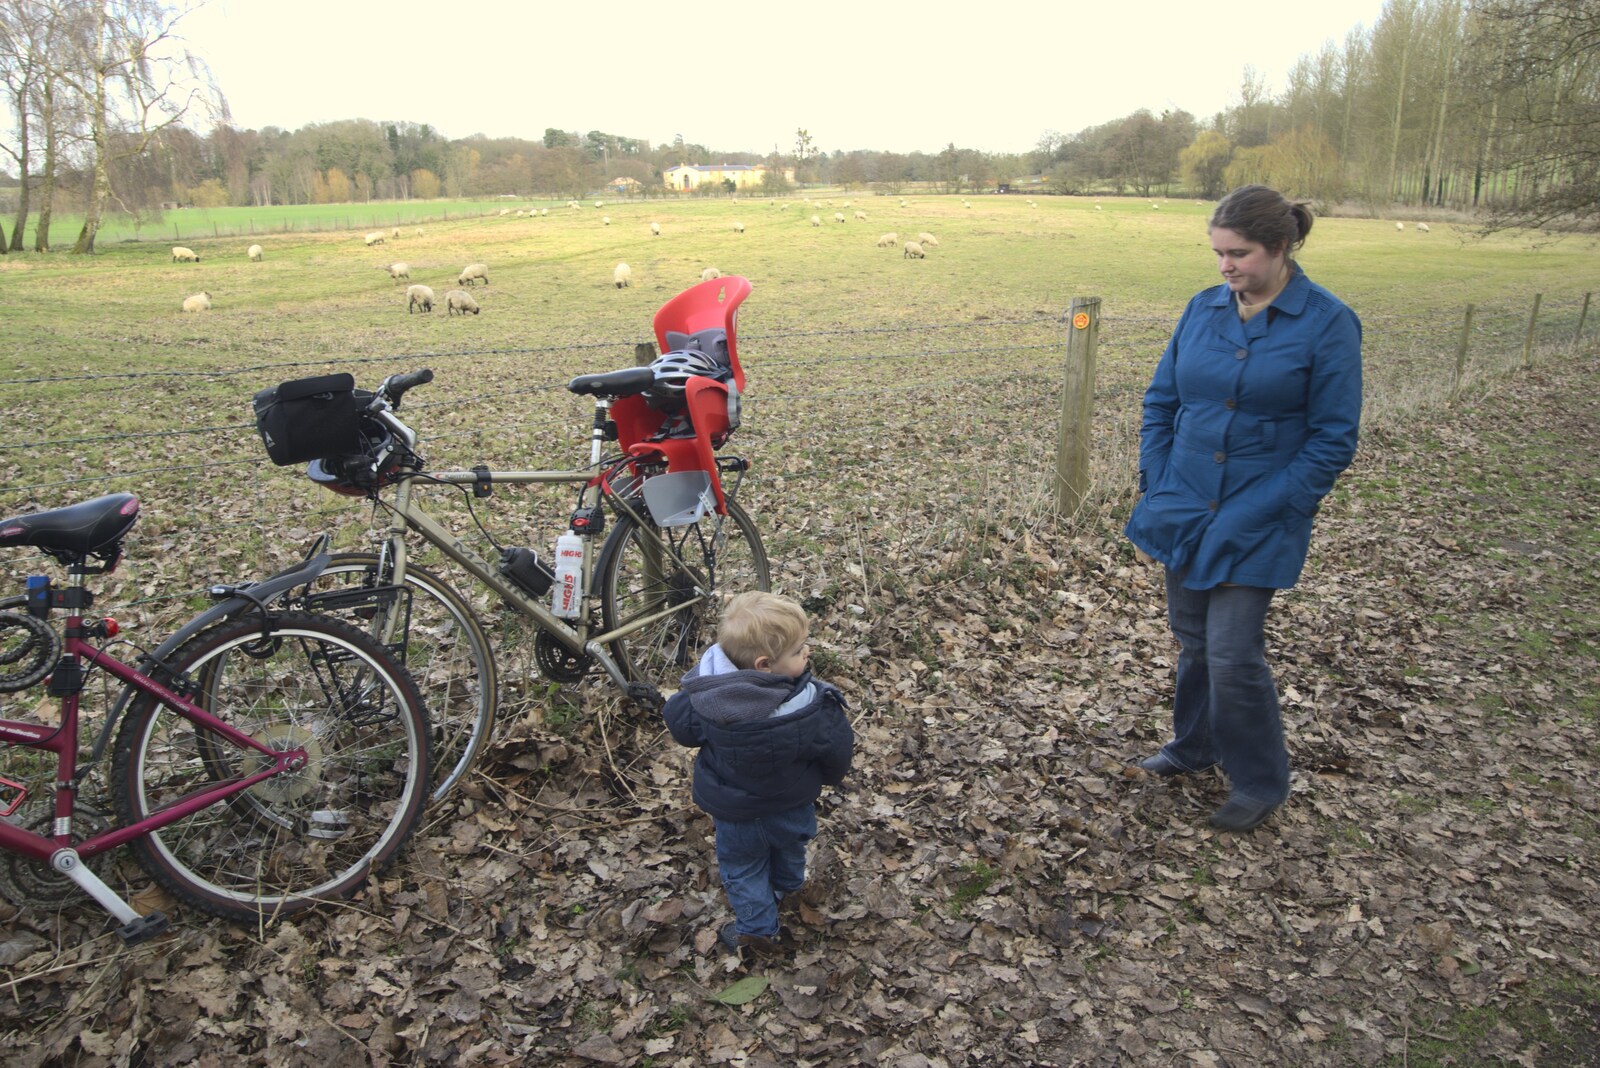 A Cycle to The Laundry, and a Trip to Framlingham, Suffolk - 24th March 2010: Fred, Isobel, the bike and a field of sheep